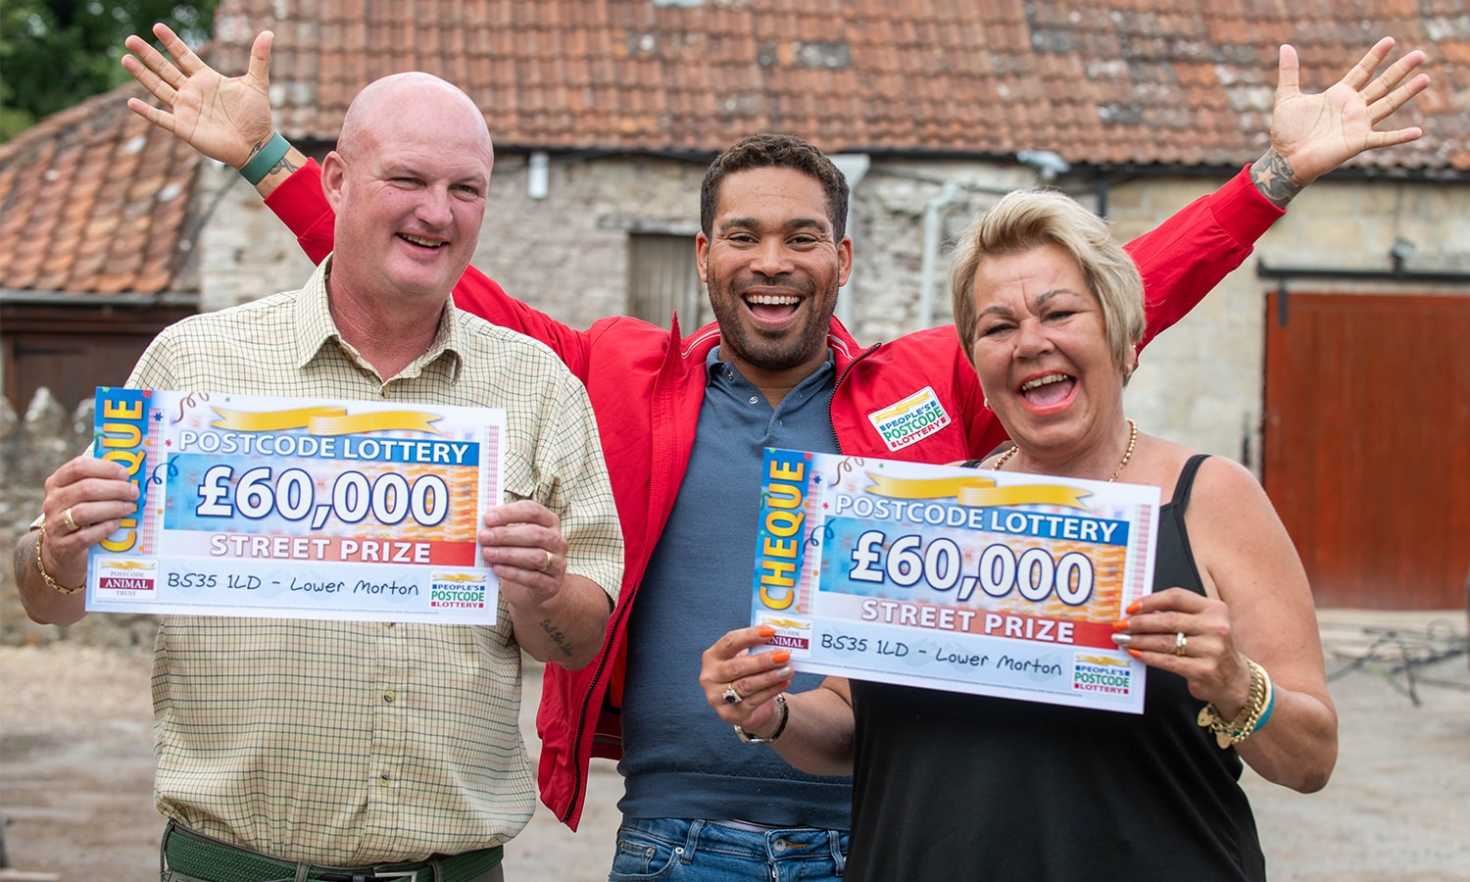 Two of our lucky £30,000 Street Prize winners celebrating with Danyl in Lower Morton